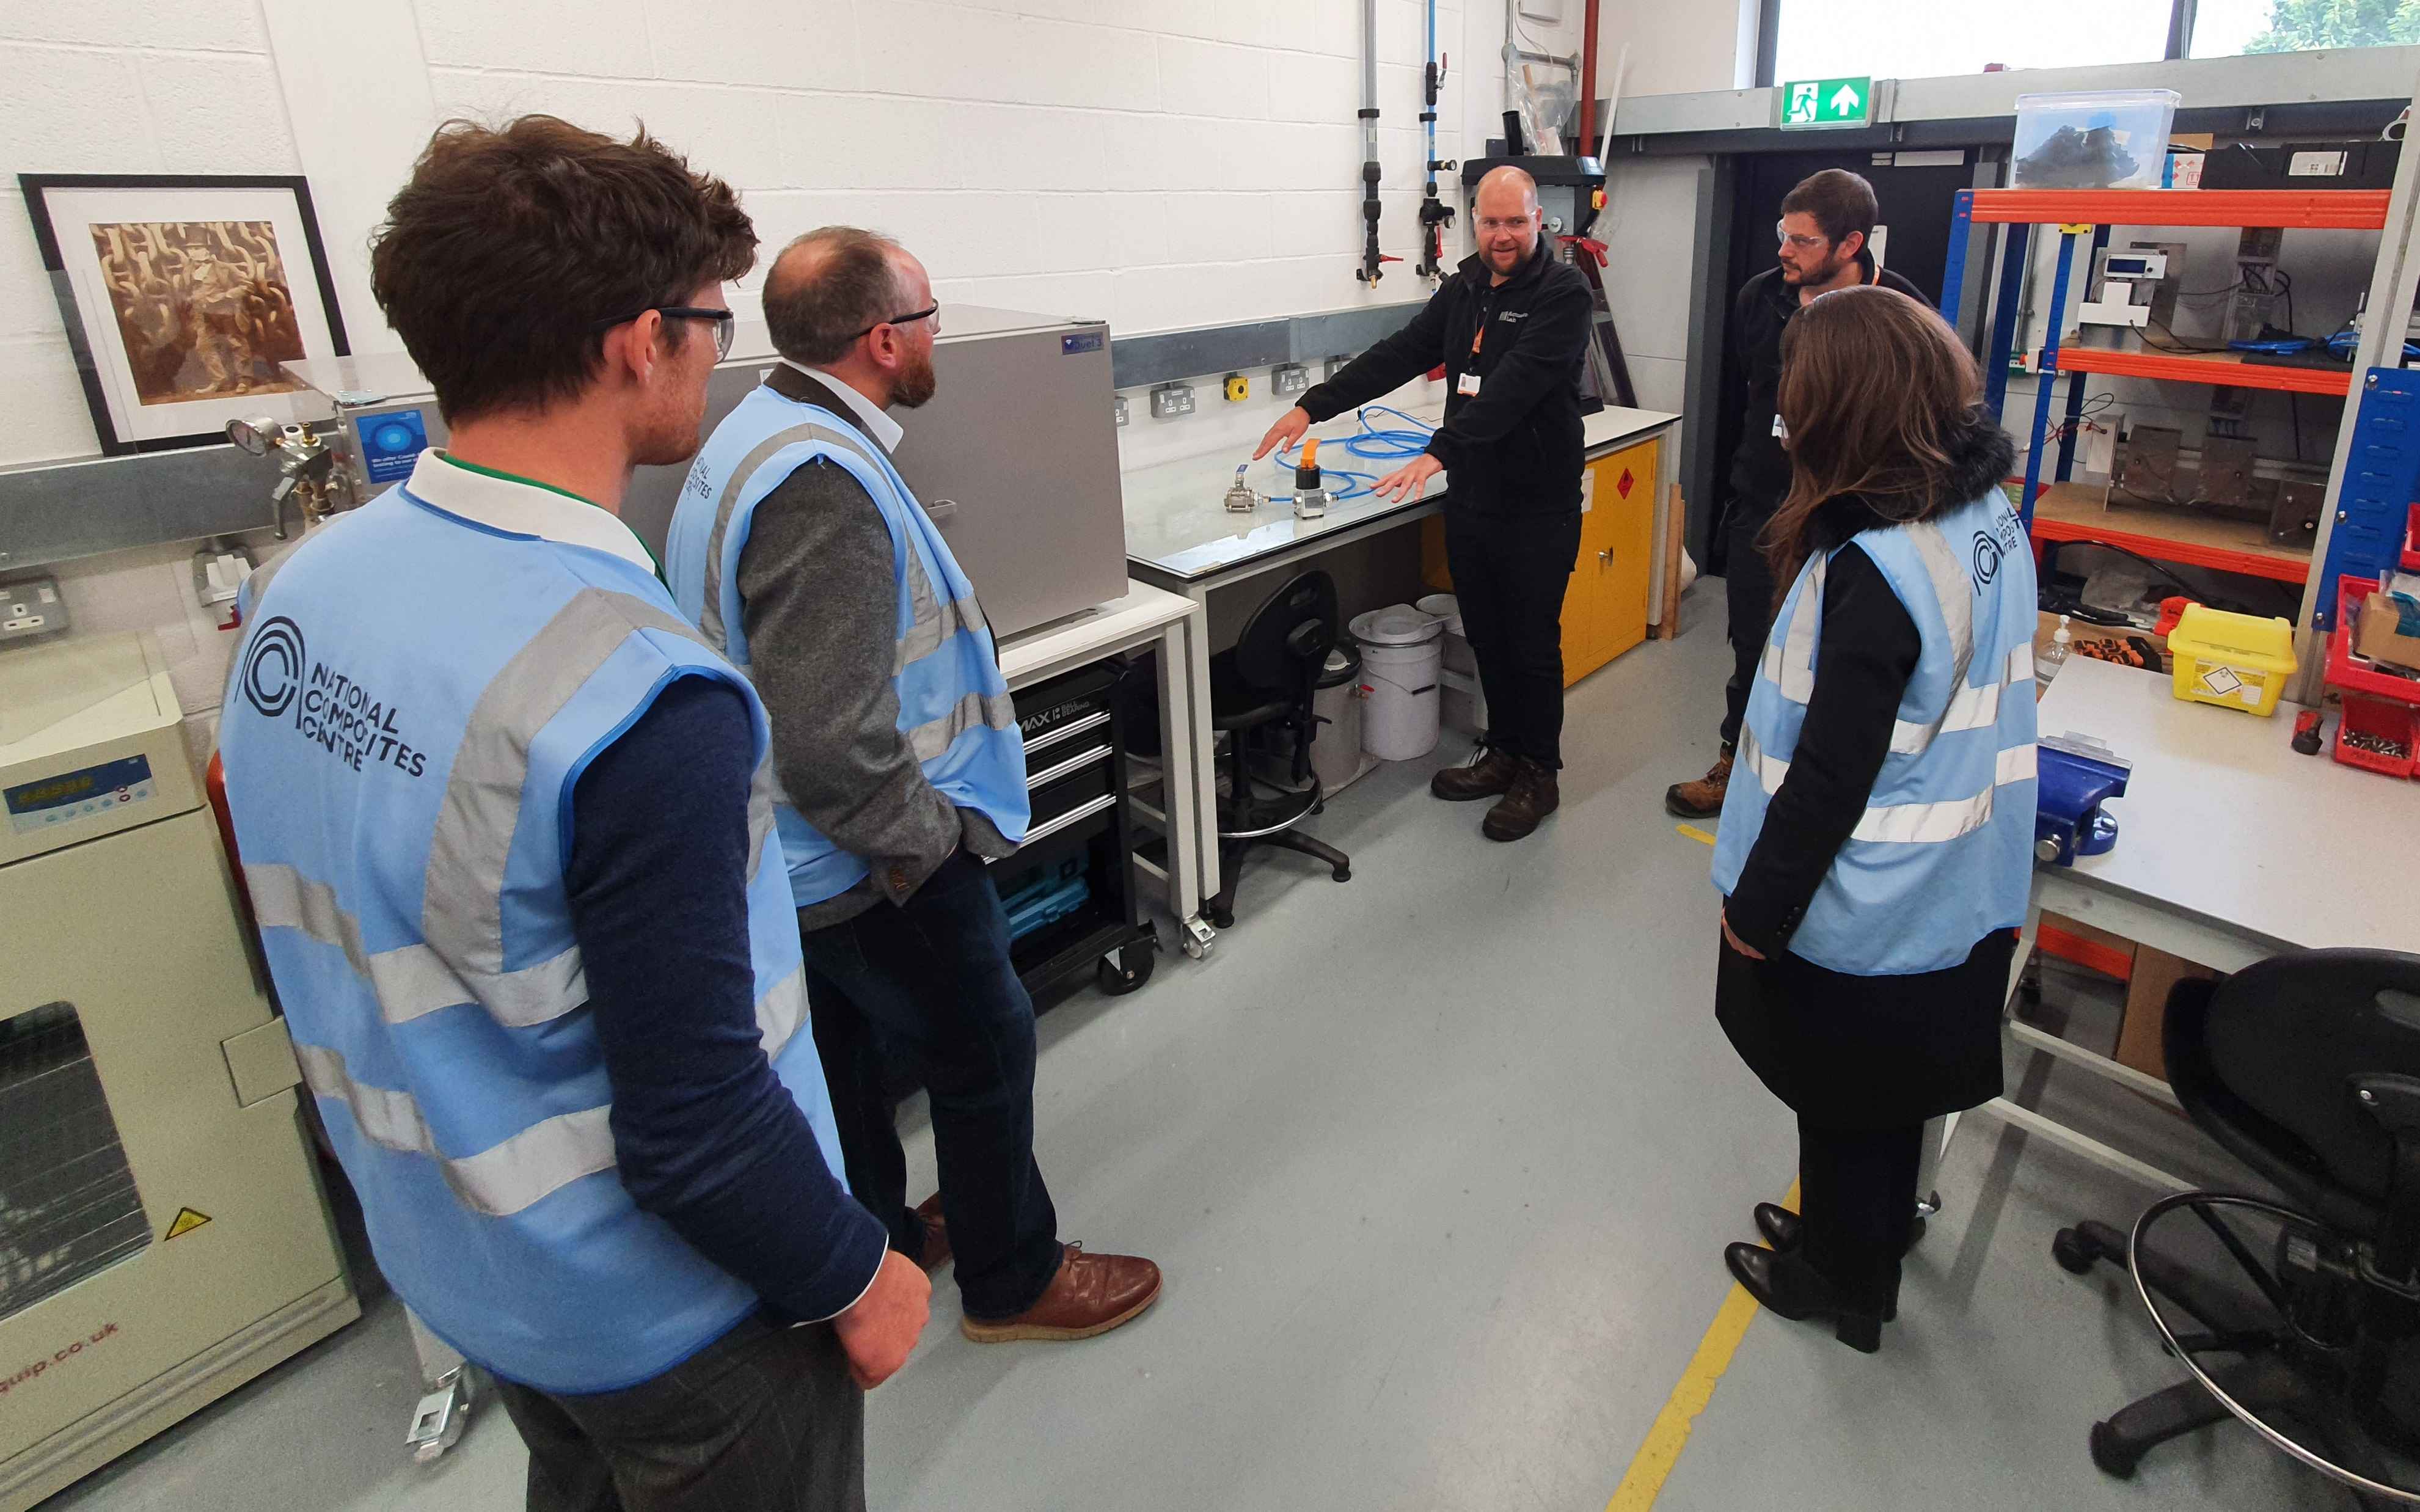 Our CTO Michael Dicker demonstrating the Dragonfly Valve to our visitors